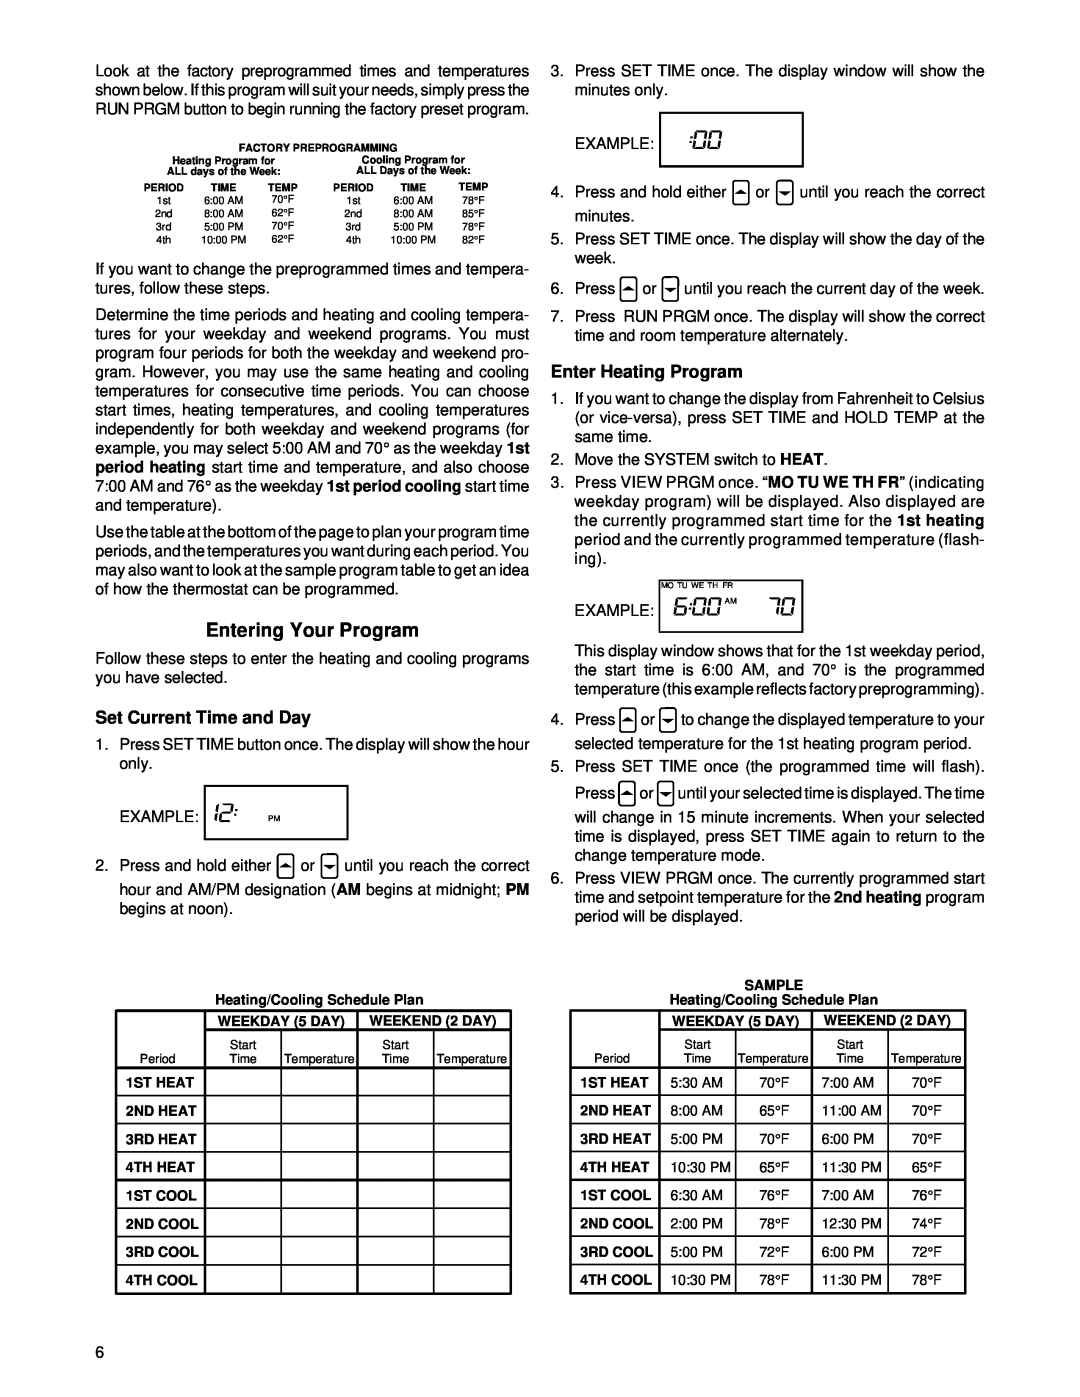 White Rodgers 1f81-51 specifications Entering Your Program, Enter Heating Program, Set Current Time and Day 